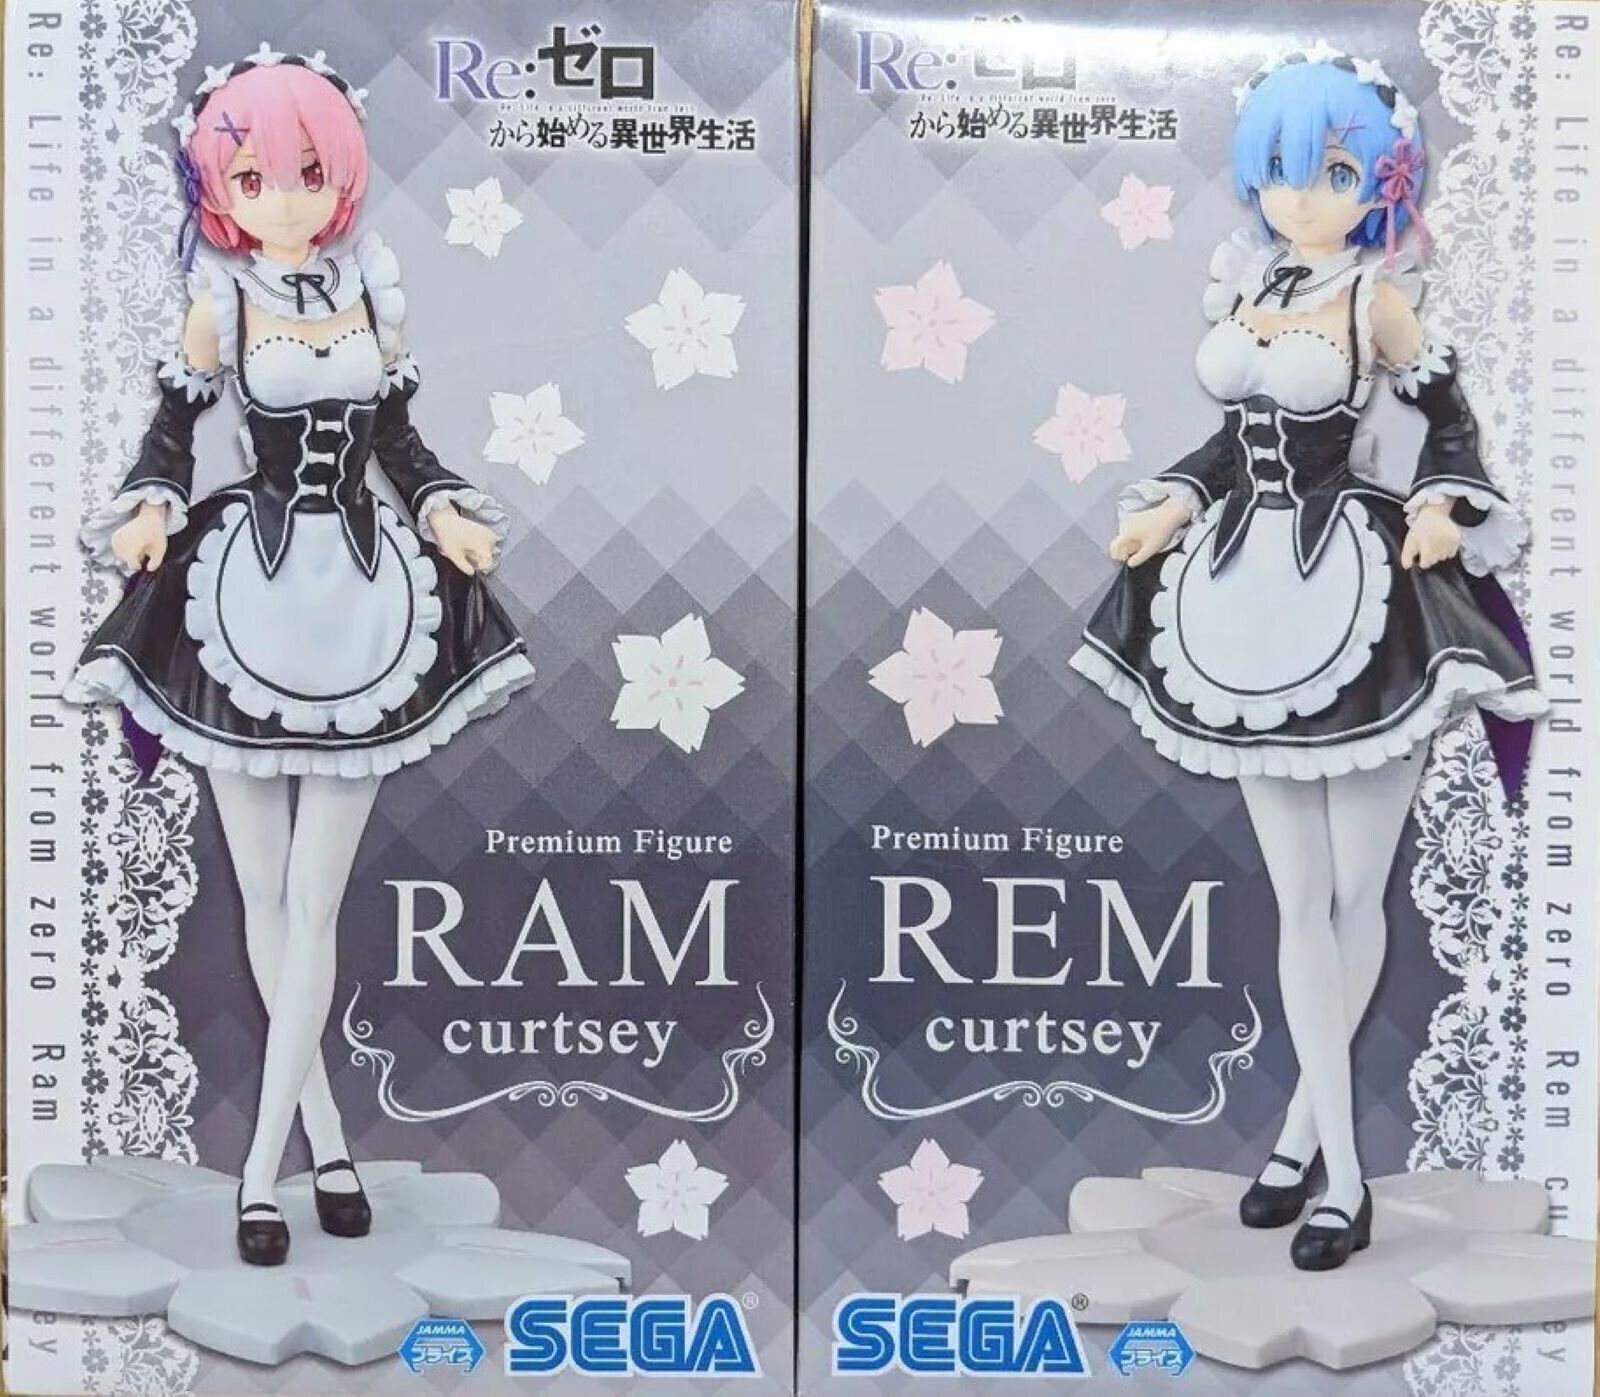 Re:Zero Starting Life in Another World Ram & Rem Curtsey Premium Figure Set of 2